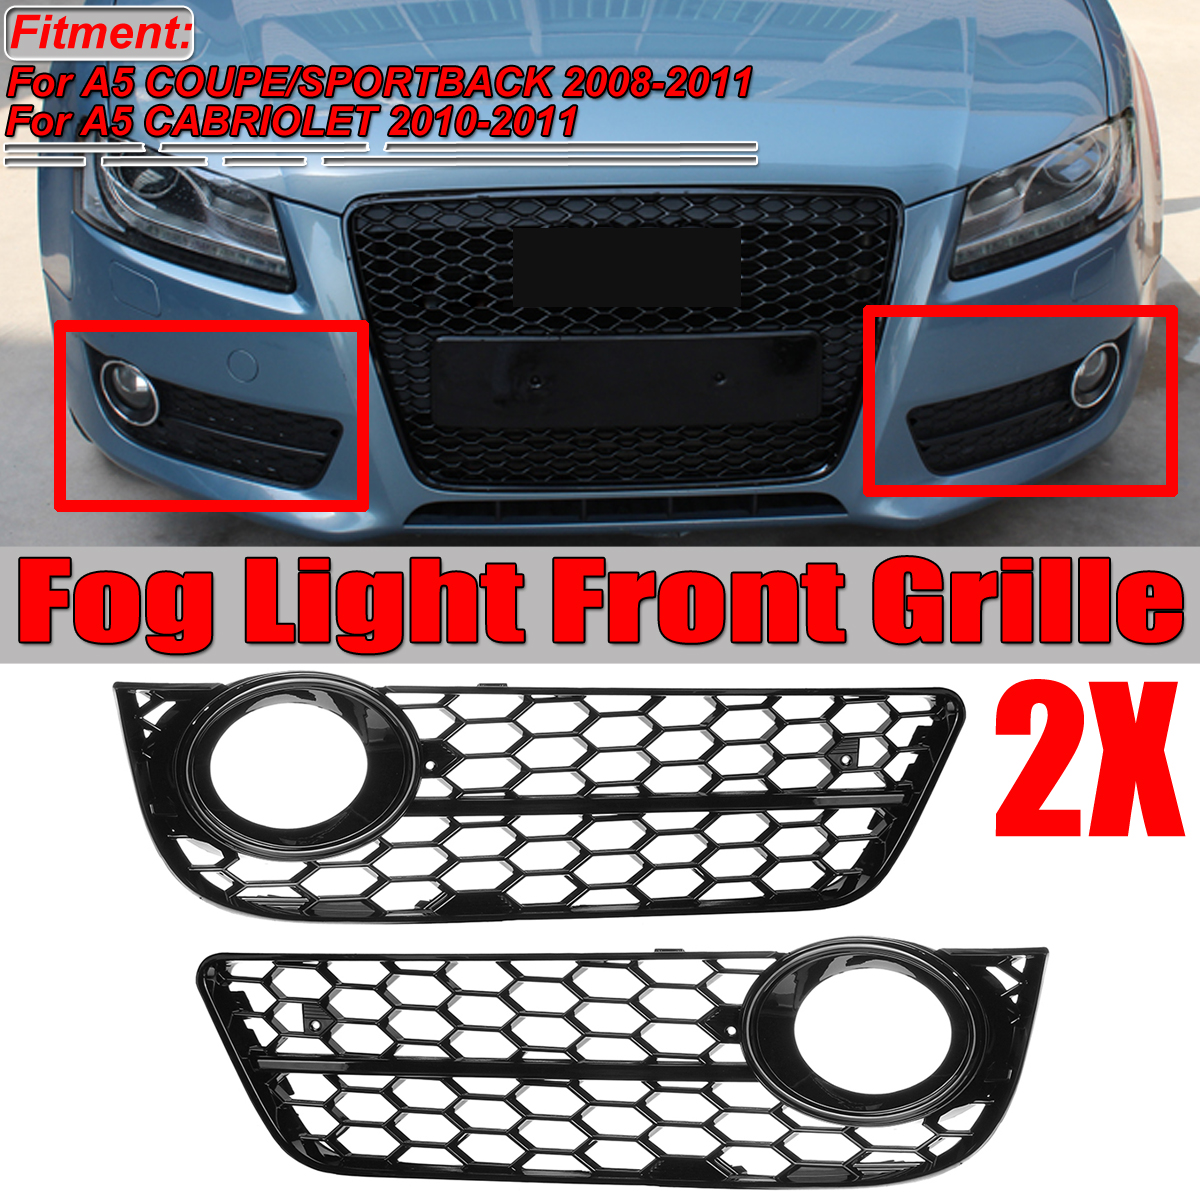 Wenxin A Pair Front Bumper Fog Light Lamp Racing Honeycomb Hex Mesh Grill Cover Fit For Audi A5 For Coupe/Sportback 2008-11 Cabriole，Fog Light Grille Color : Black